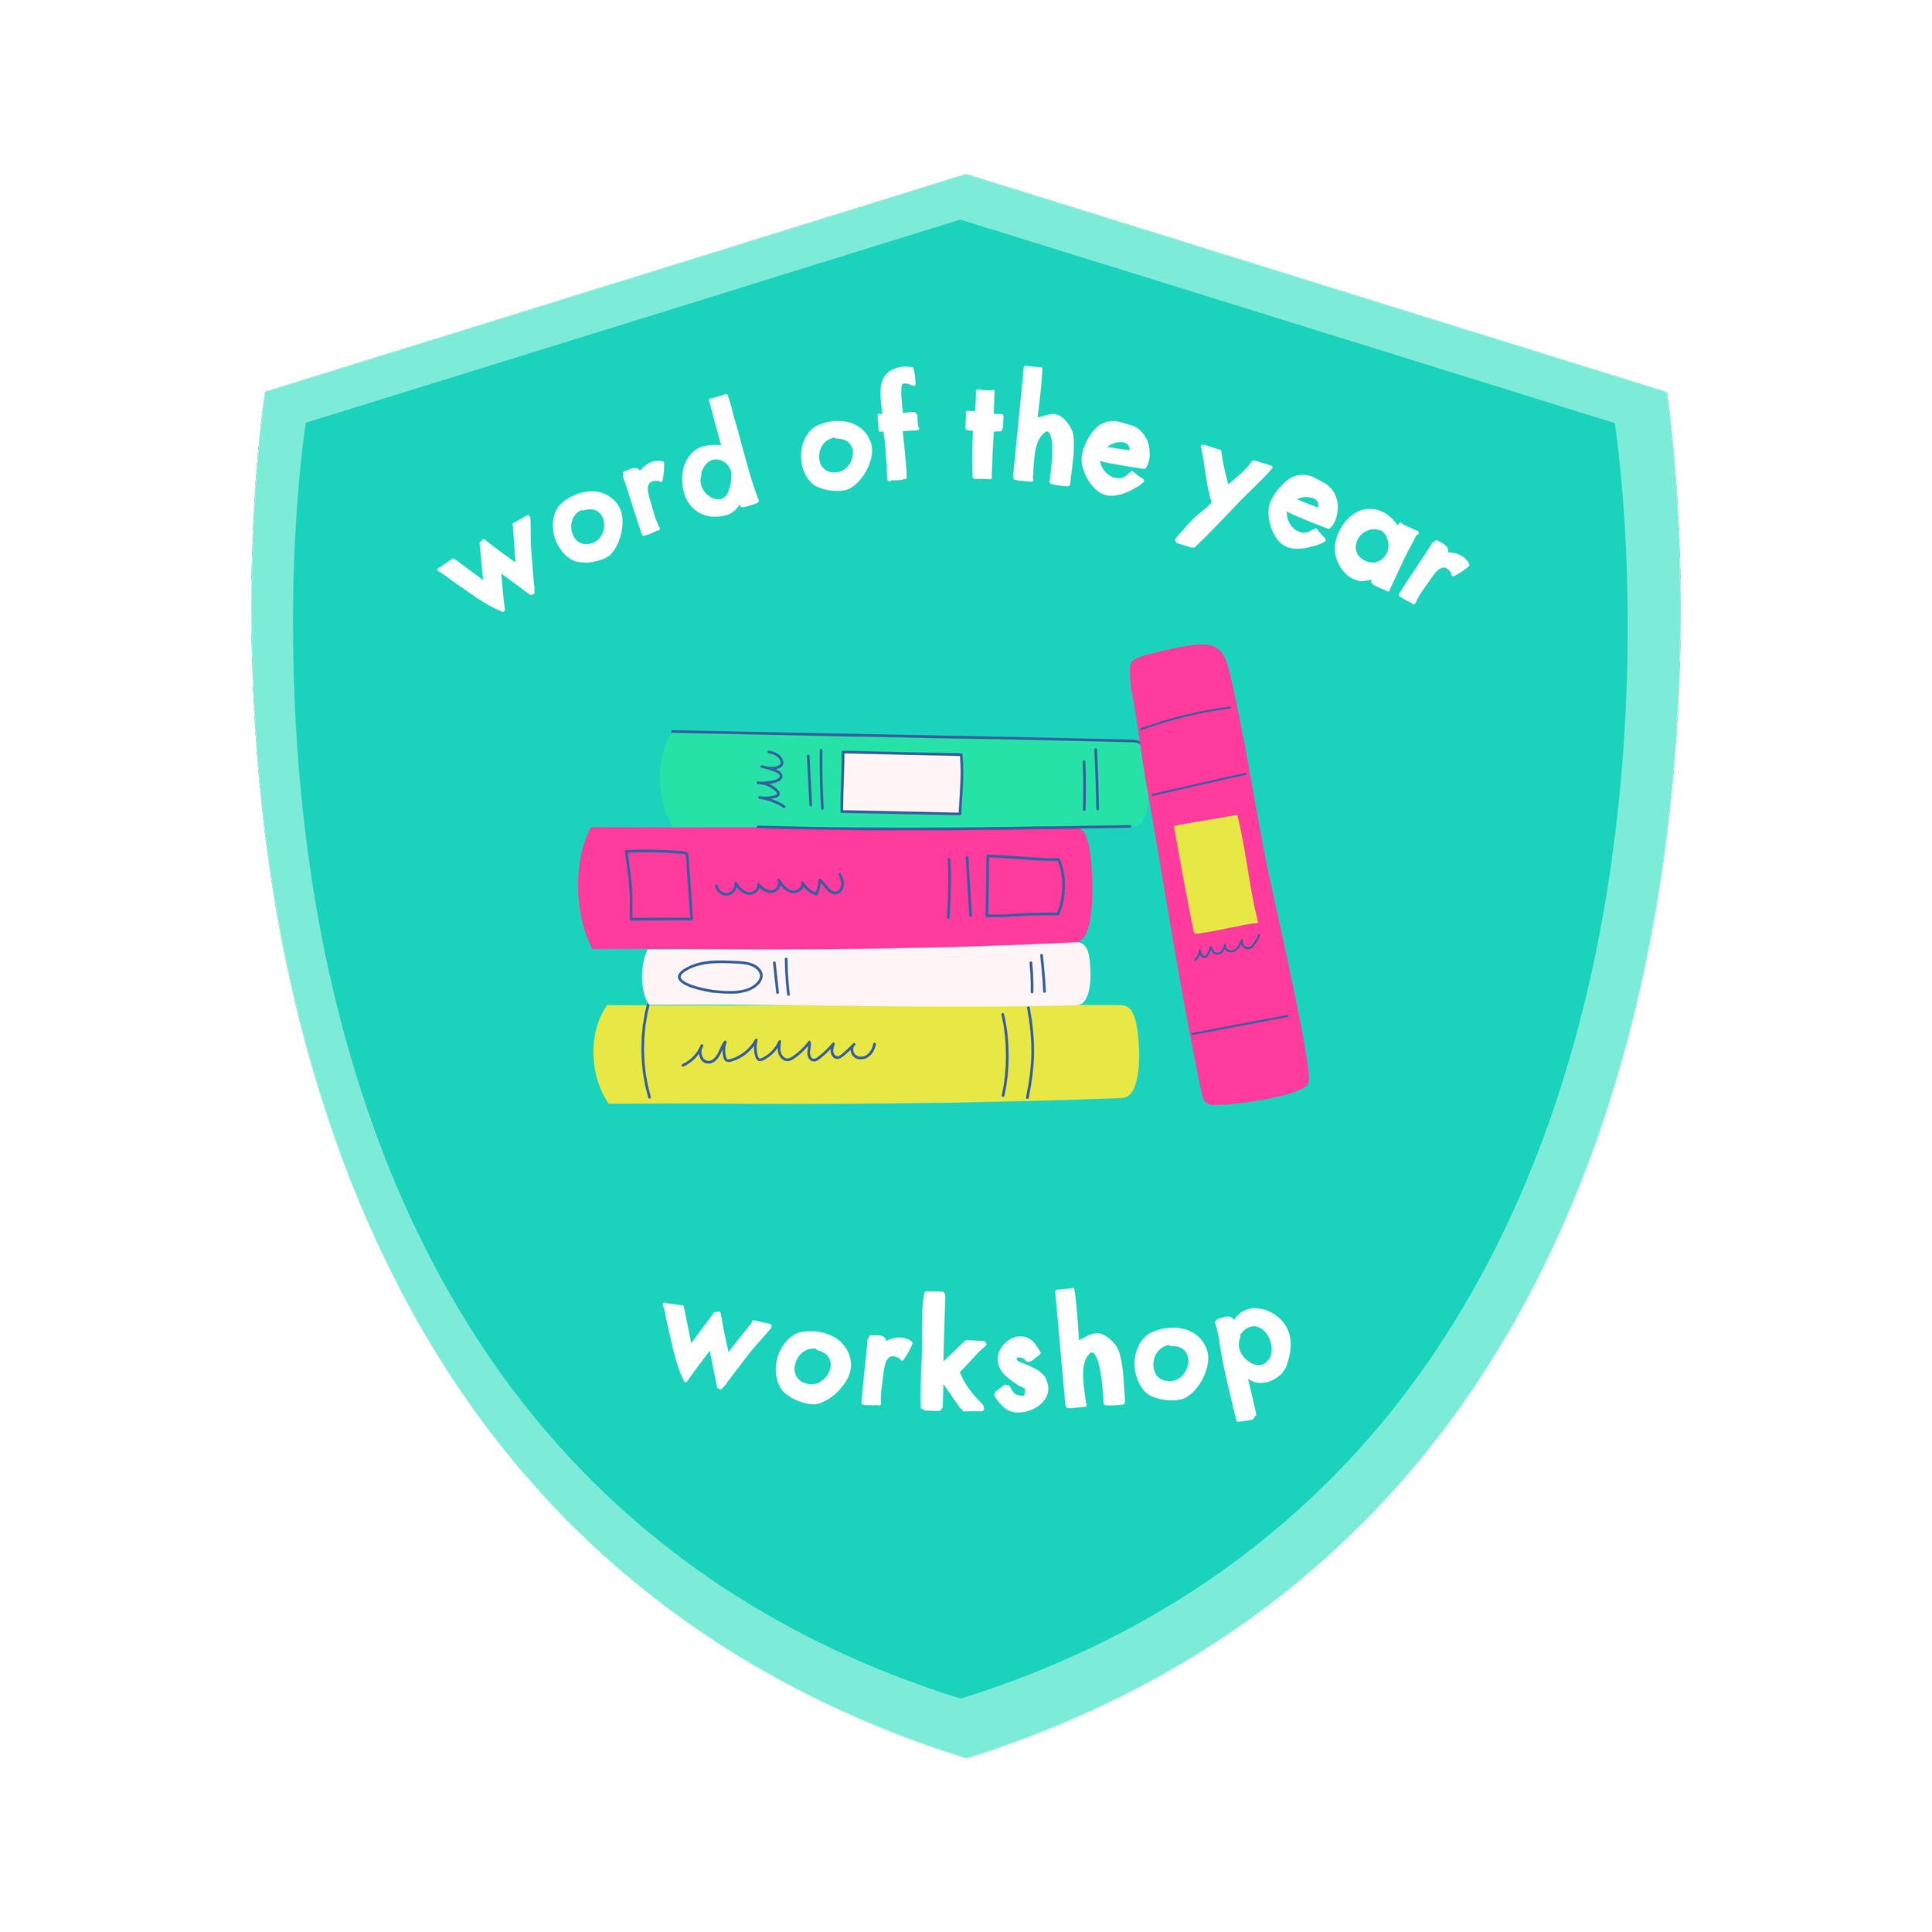 WORD OF THE YEAR WORKSHOP.png